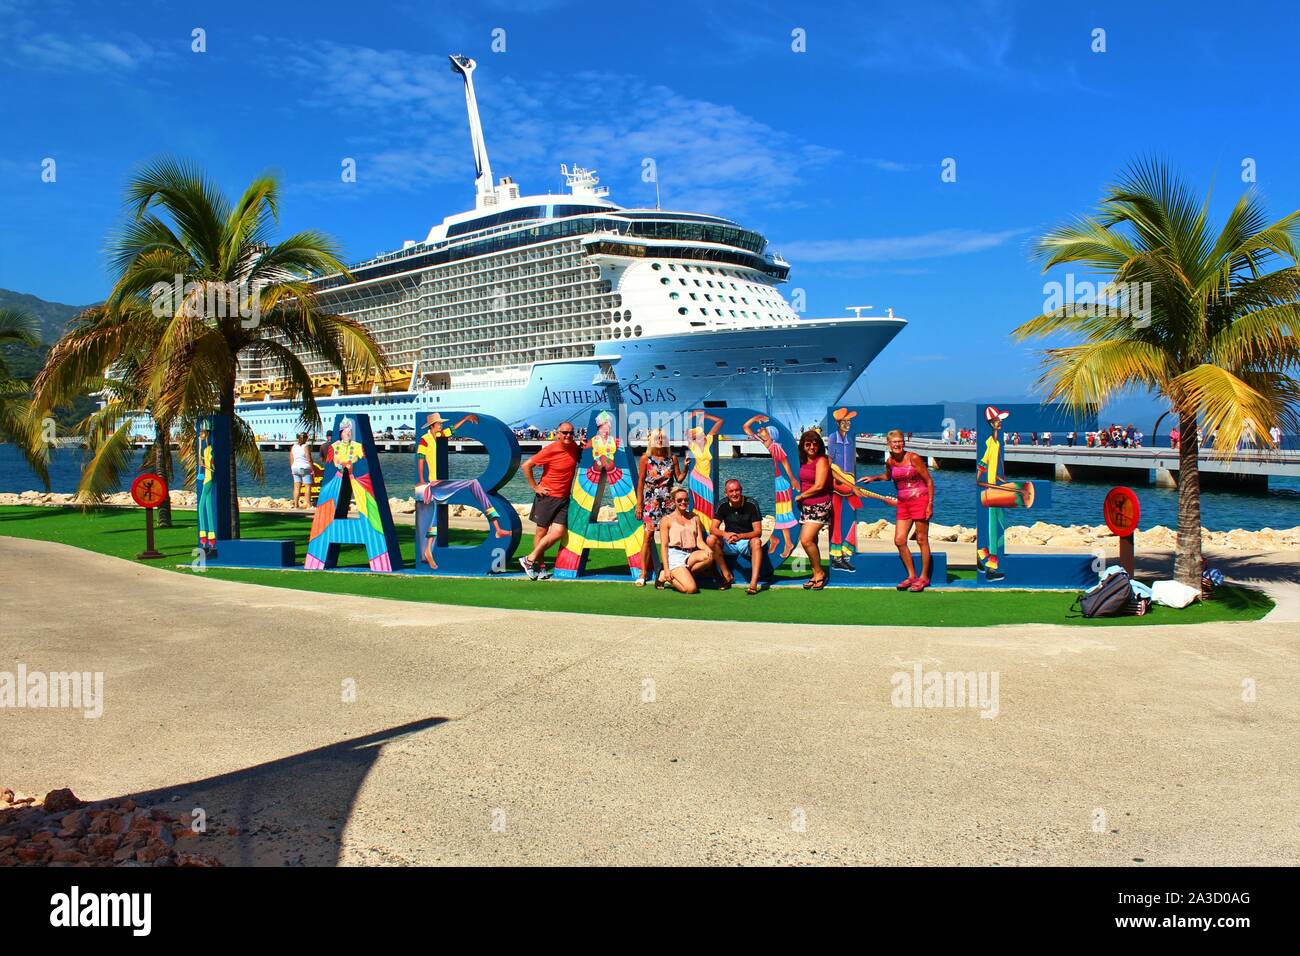 Tourists pose for photos in front of the Royal Caribbean Anthem Of The Seas cruise ship, on the Royal Caribbean privately owned resort of Labadee. Stock Photo